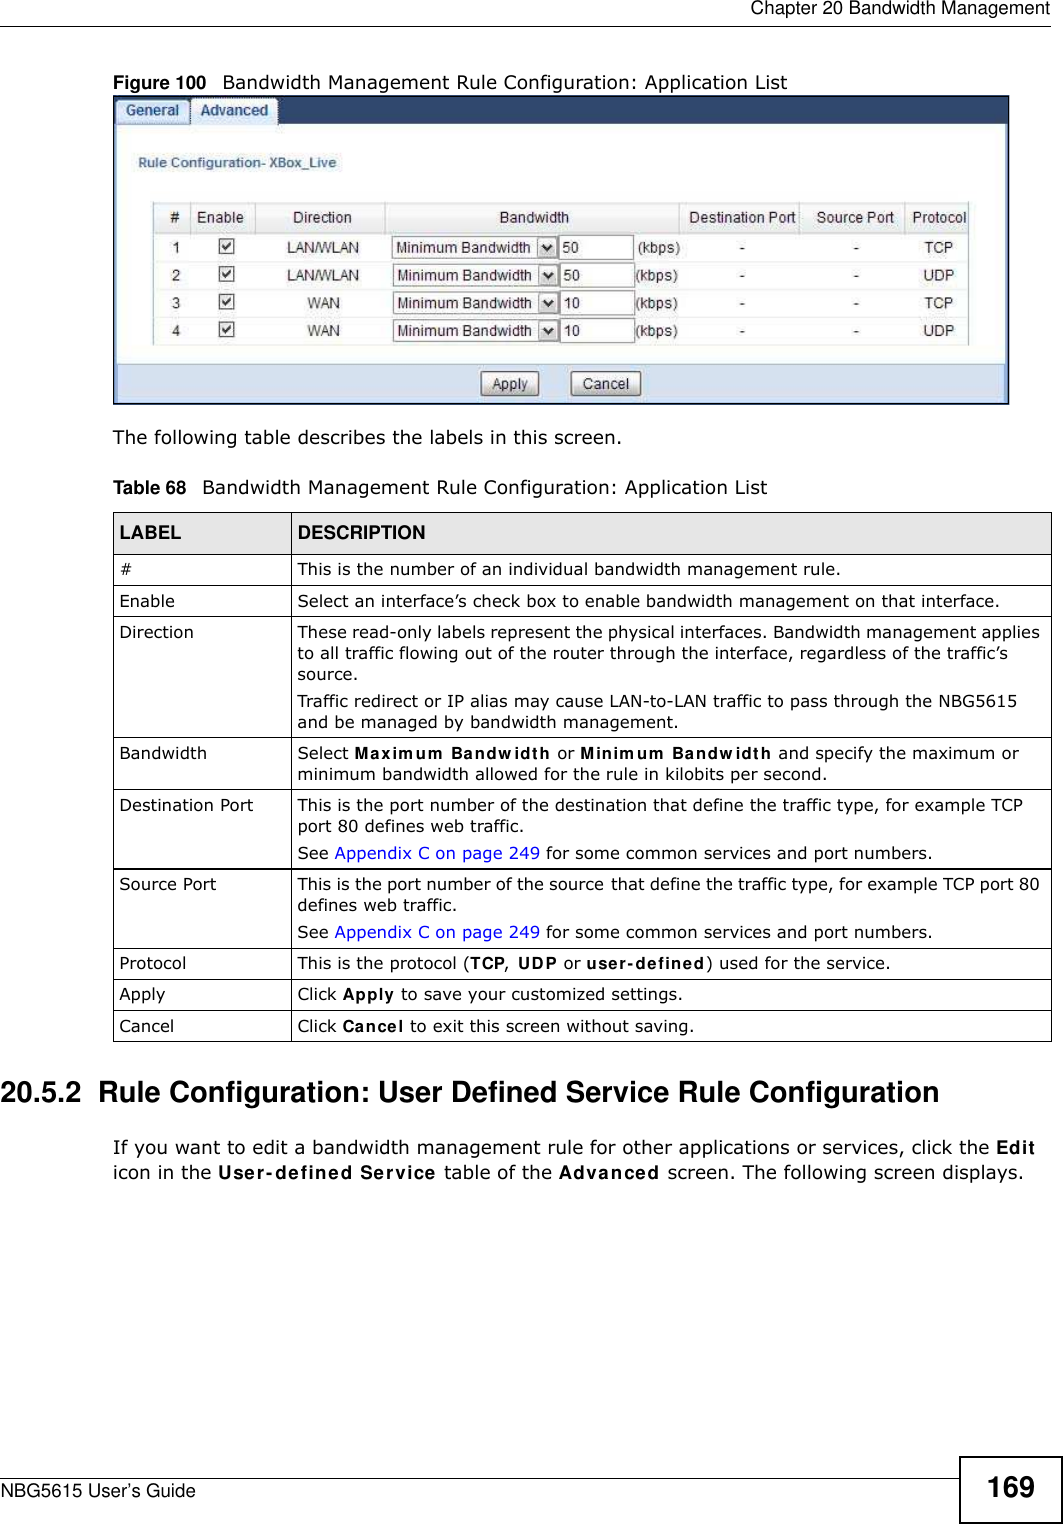  Chapter 20 Bandwidth ManagementNBG5615 User’s Guide 169Figure 100   Bandwidth Management Rule Configuration: Application ListThe following table describes the labels in this screen.20.5.2  Rule Configuration: User Defined Service Rule Configuration    If you want to edit a bandwidth management rule for other applications or services, click the Edit icon in the User-defined Service table of the Advanced screen. The following screen displays.Table 68   Bandwidth Management Rule Configuration: Application ListLABEL DESCRIPTION#This is the number of an individual bandwidth management rule.Enable Select an interface’s check box to enable bandwidth management on that interface. Direction  These read-only labels represent the physical interfaces. Bandwidth management applies to all traffic flowing out of the router through the interface, regardless of the traffic’s source.Traffic redirect or IP alias may cause LAN-to-LAN traffic to pass through the NBG5615 and be managed by bandwidth management.Bandwidth Select Maxim um  Bandw idth or Minim um Bandw idth and specify the maximum or minimum bandwidth allowed for the rule in kilobits per second. Destination Port This is the port number of the destination that define the traffic type, for example TCP port 80 defines web traffic.See Appendix C on page 249 for some common services and port numbers.Source Port This is the port number of the source that define the traffic type, for example TCP port 80 defines web traffic.See Appendix C on page 249 for some common services and port numbers.Protocol This is the protocol (TCP, UDP or user-defined) used for the service.Apply Click Apply to save your customized settings.Cancel Click Cancel to exit this screen without saving.